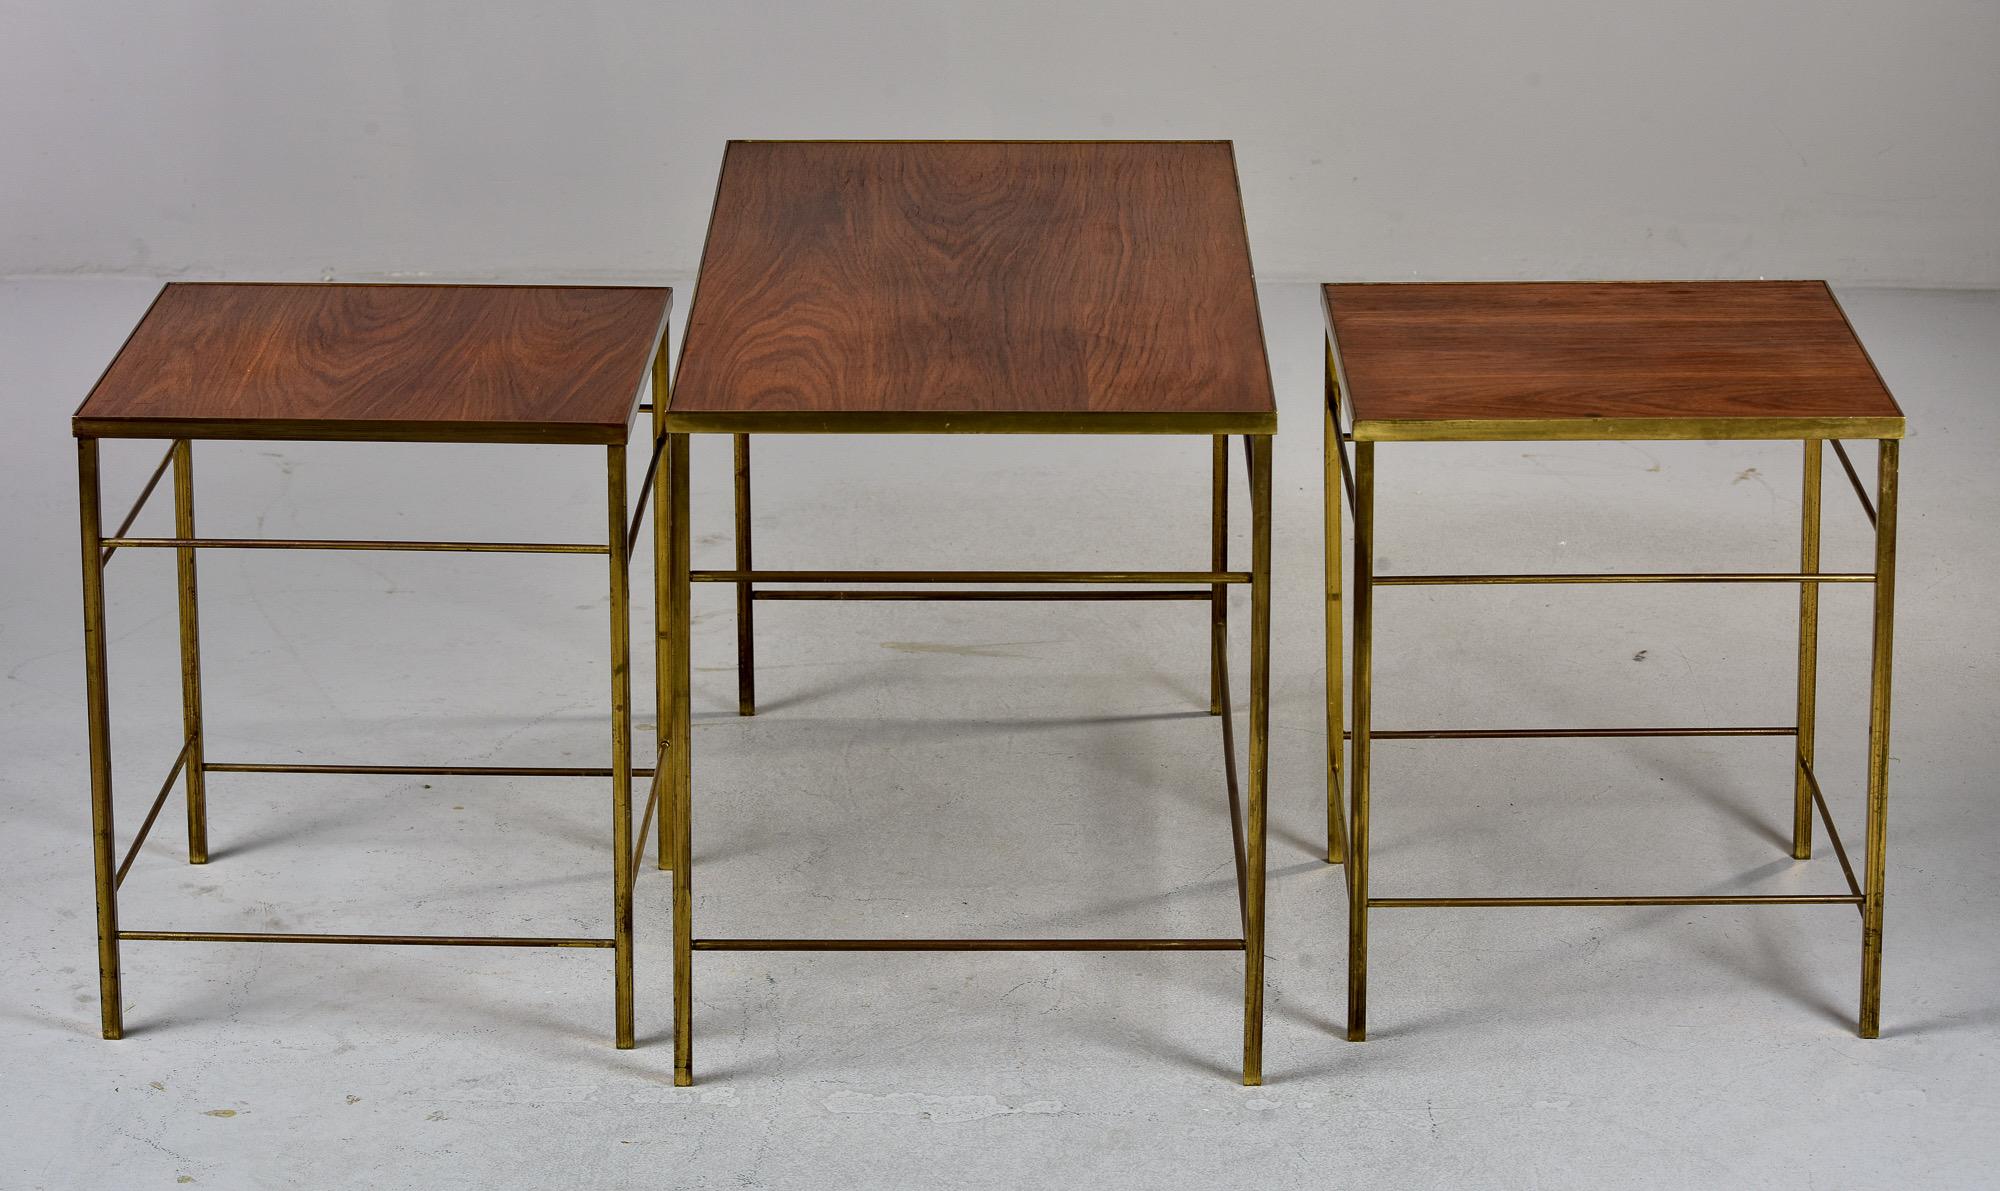 English Mid Century Brass and Wood Trio of Stacking Tables For Sale 6